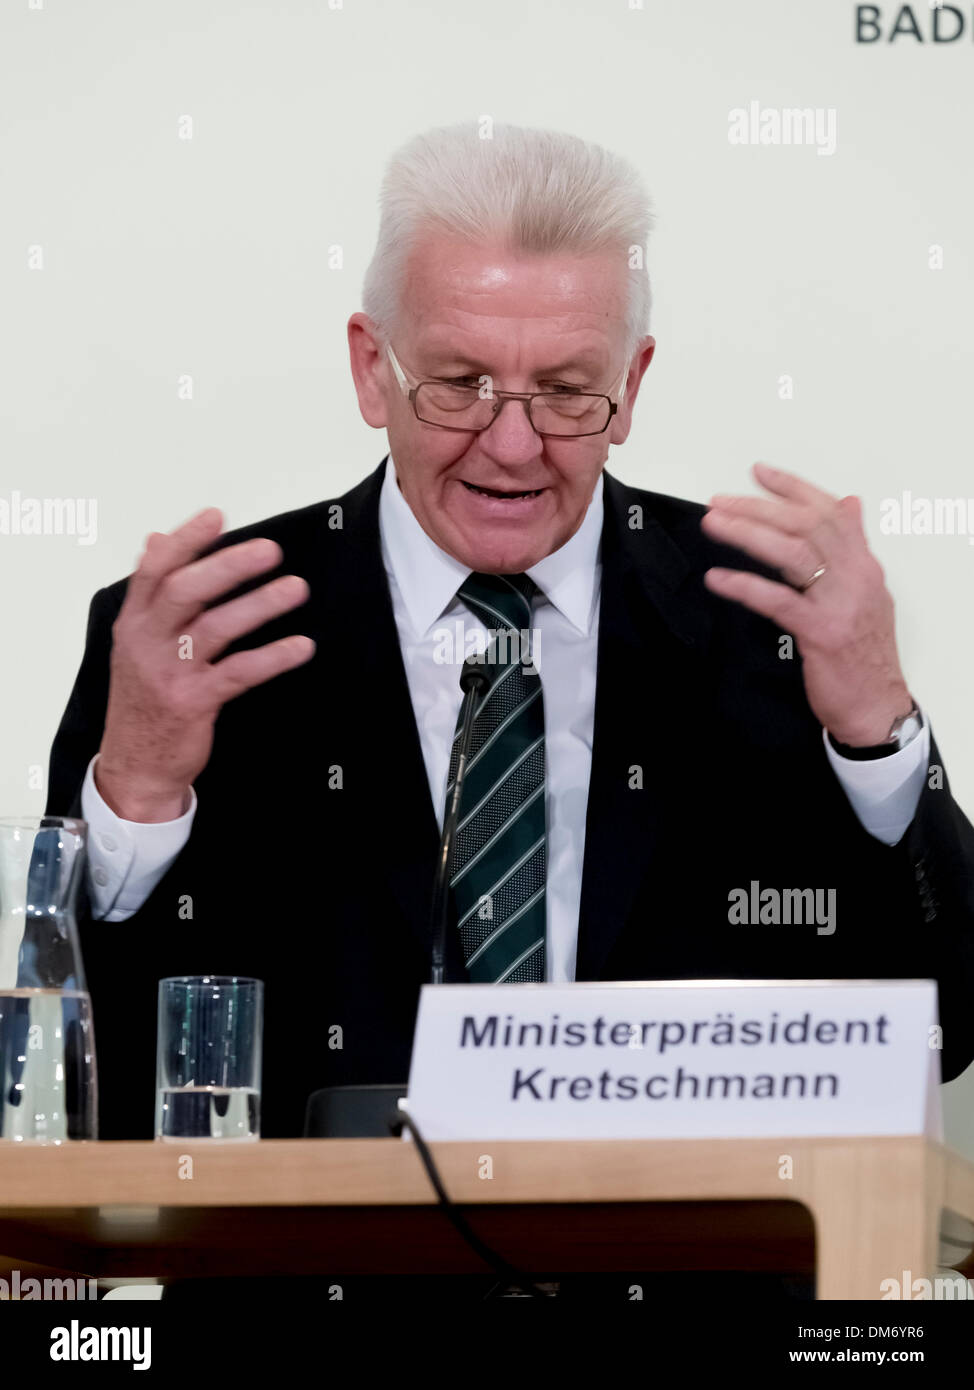 Berlin, Germany. December 12th, 2013. Press Conference with Prime Minister Kretschmann, Prime Minister Lieberknecht and Prime Minister Albig after Meeting/Conference of the heads of government of the Germany Federal states at the representation of Baden-Wuerttemberg in Berlin. / Picture: Winfried Kretschmann (Green), Old President of the Conference of Prime Ministers and Minister-President of Baden-Württemberg. Credit:  Reynaldo Chaib Paganelli/Alamy Live News Stock Photo